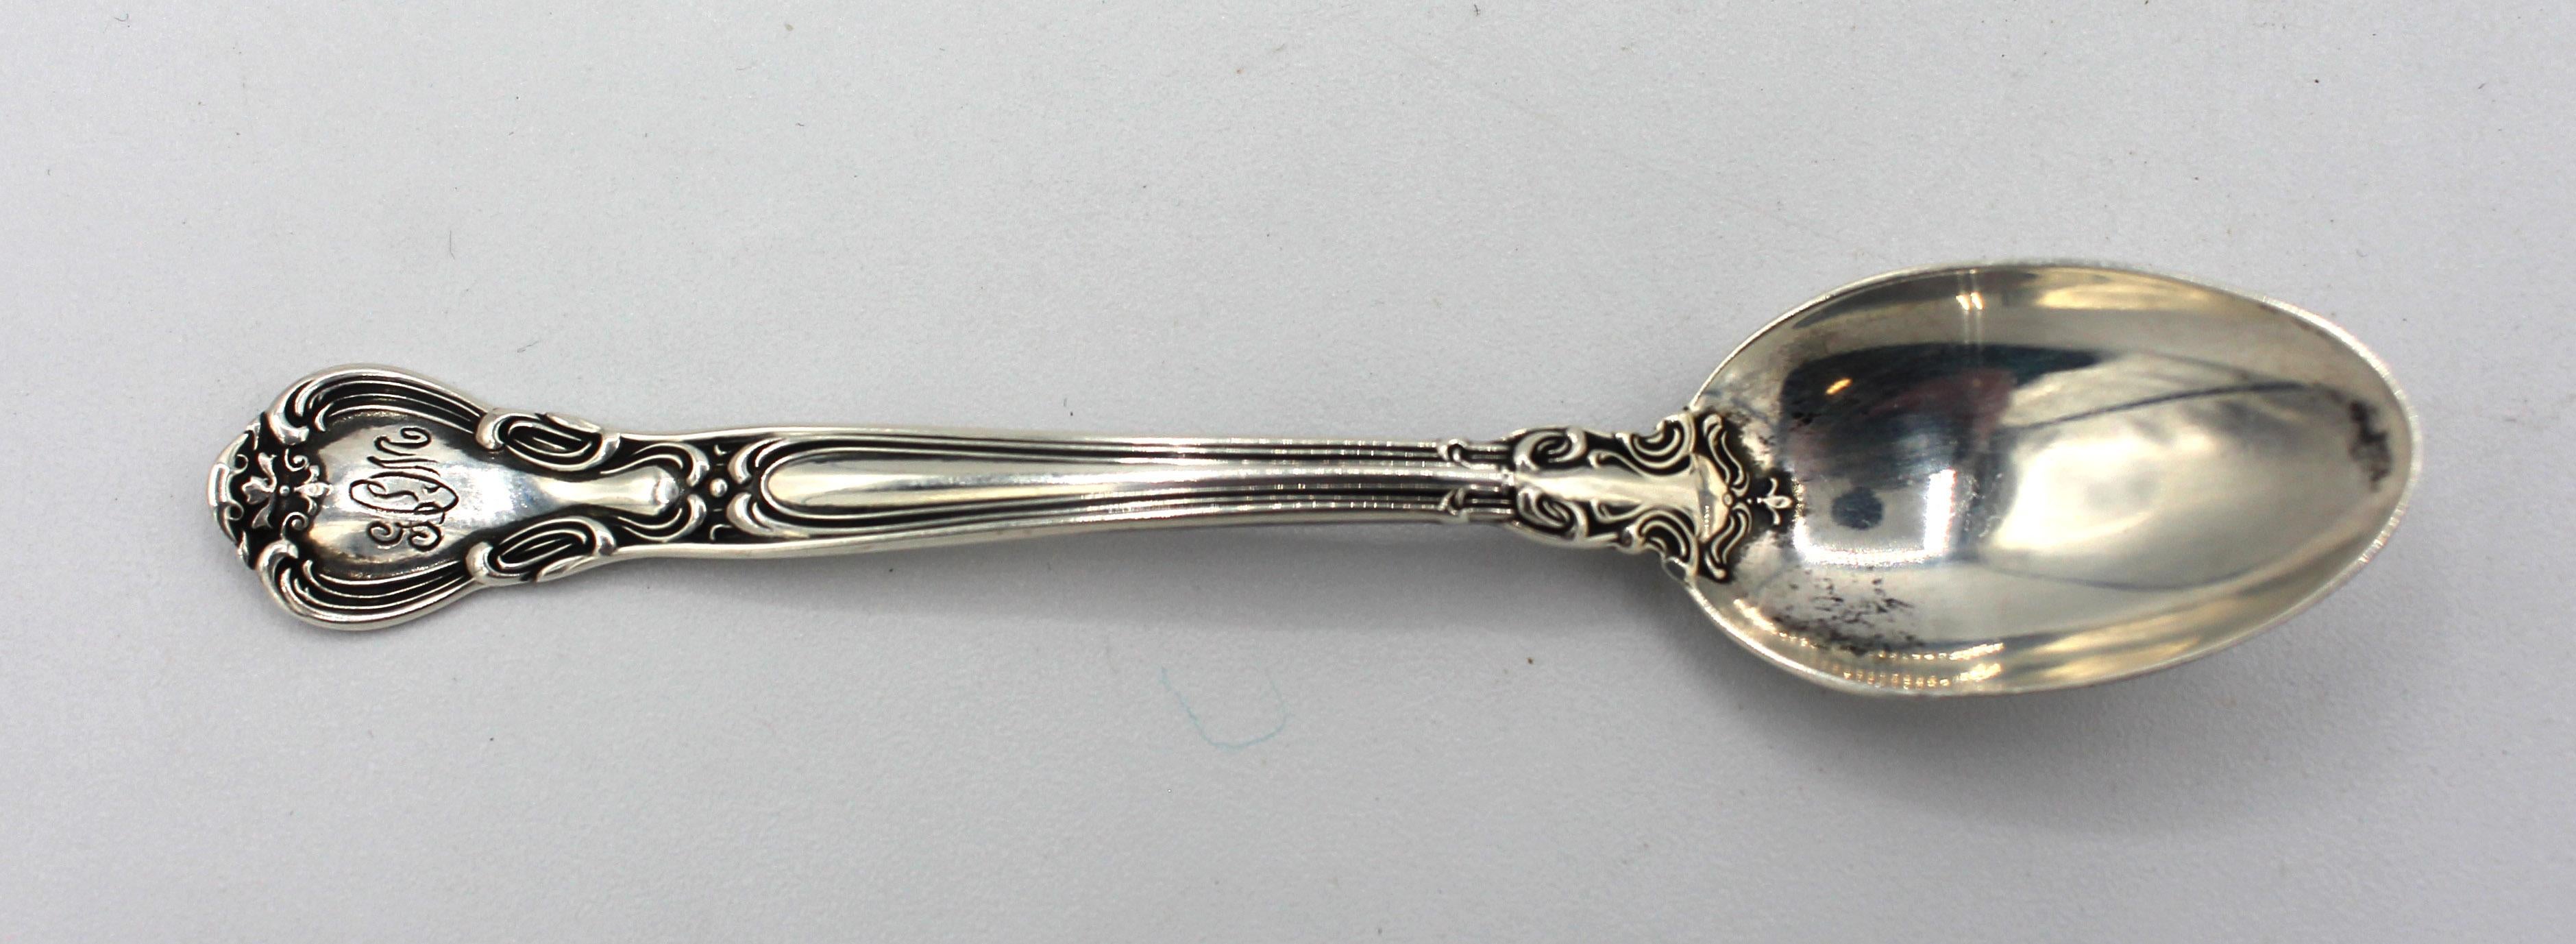 Art Deco Set of 6 Chantilly Pattern Sterling Silver Demitasse Spoons by Gorham, c.1920s For Sale